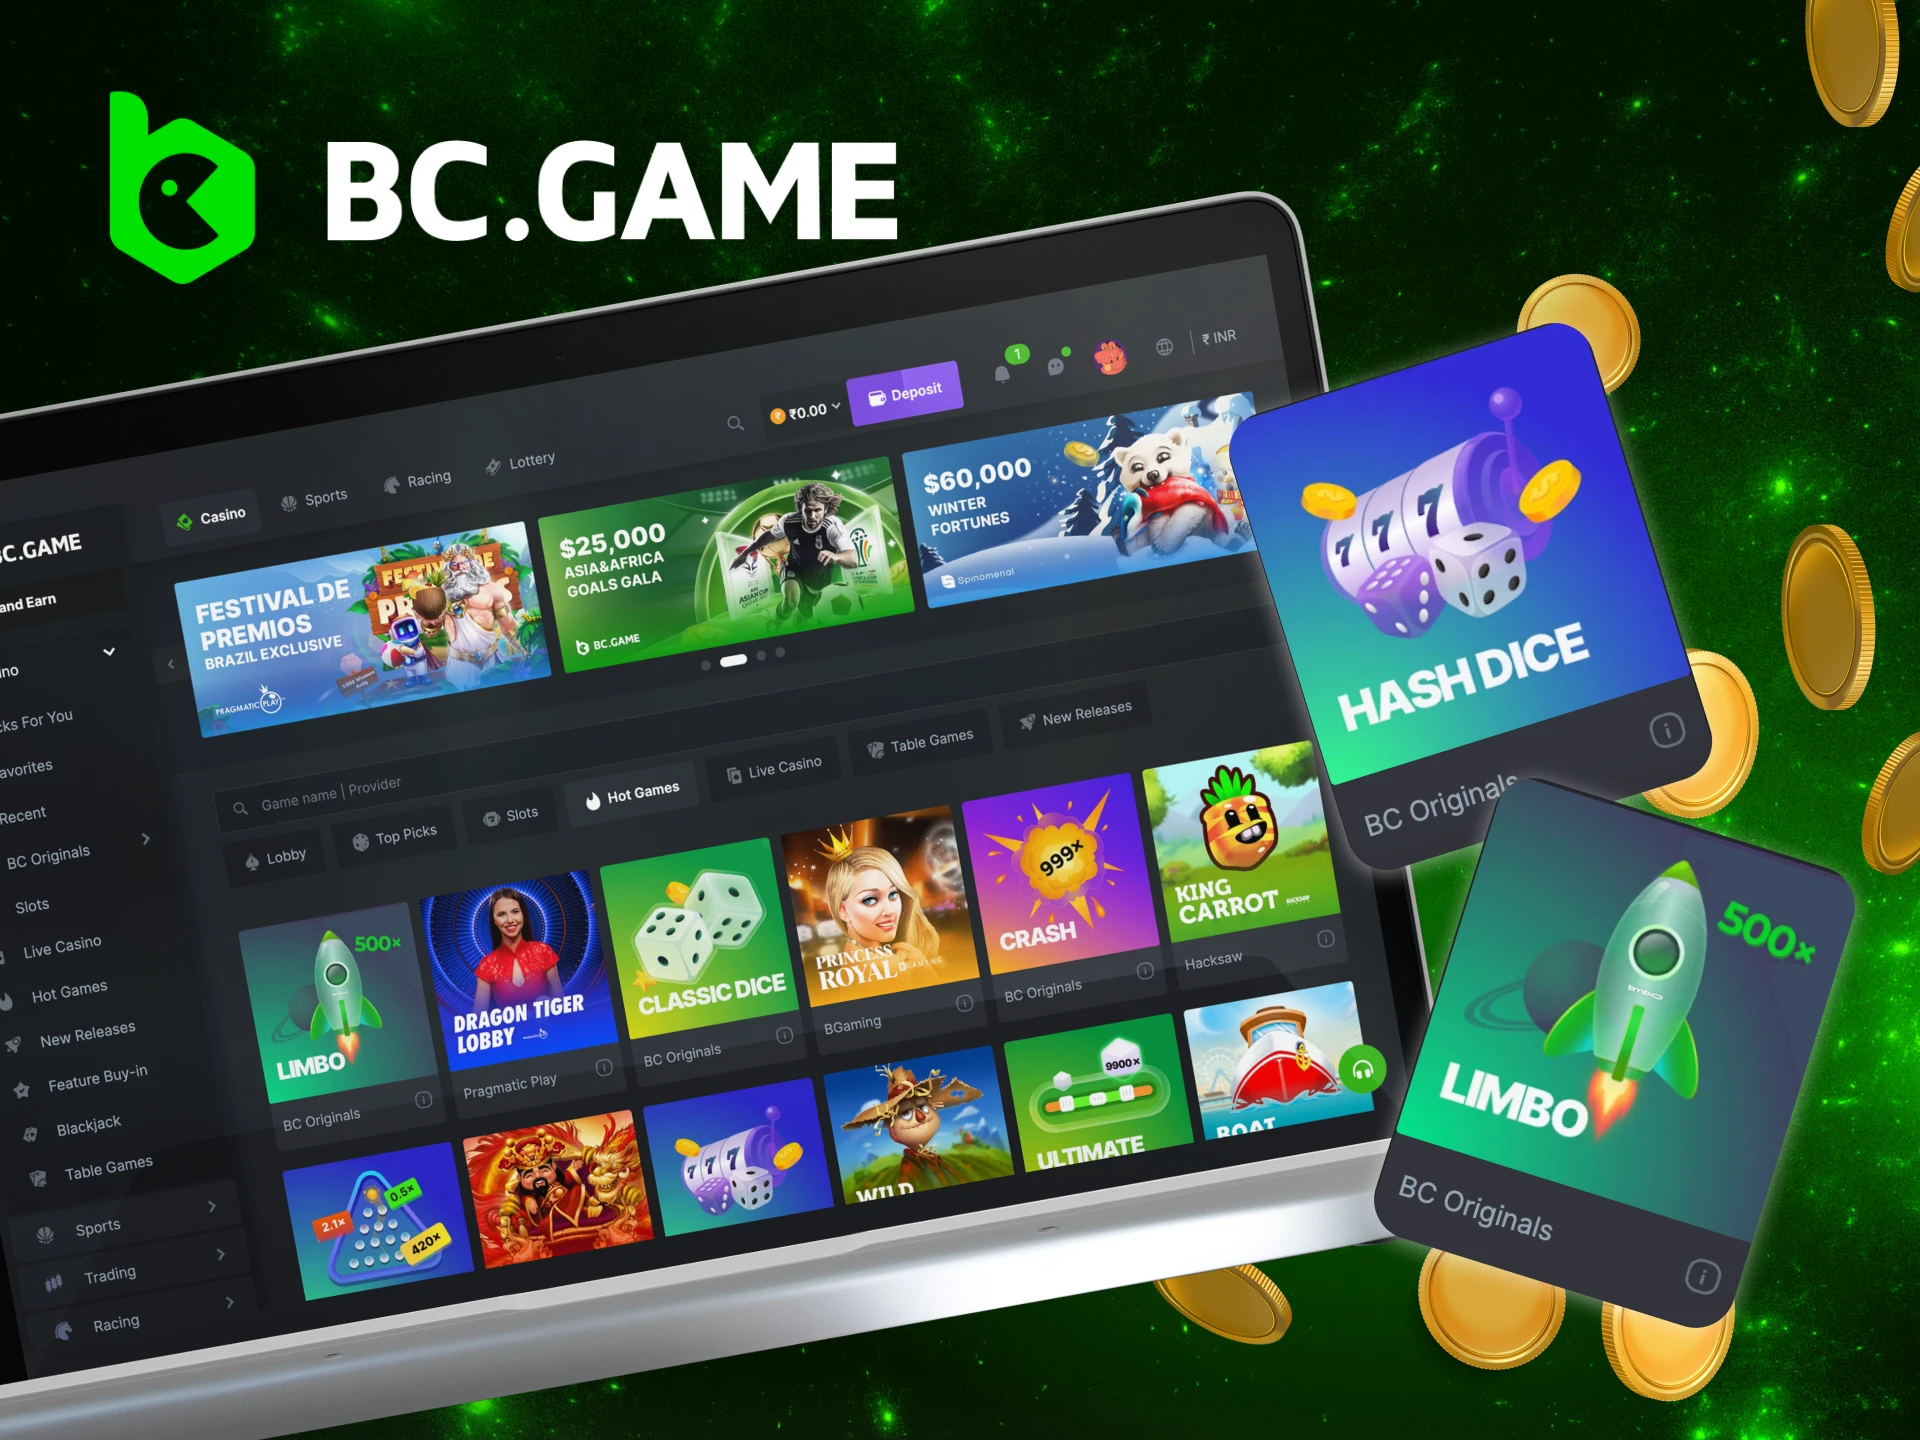 User Guide on how to start playing casino games on the BC Game website.